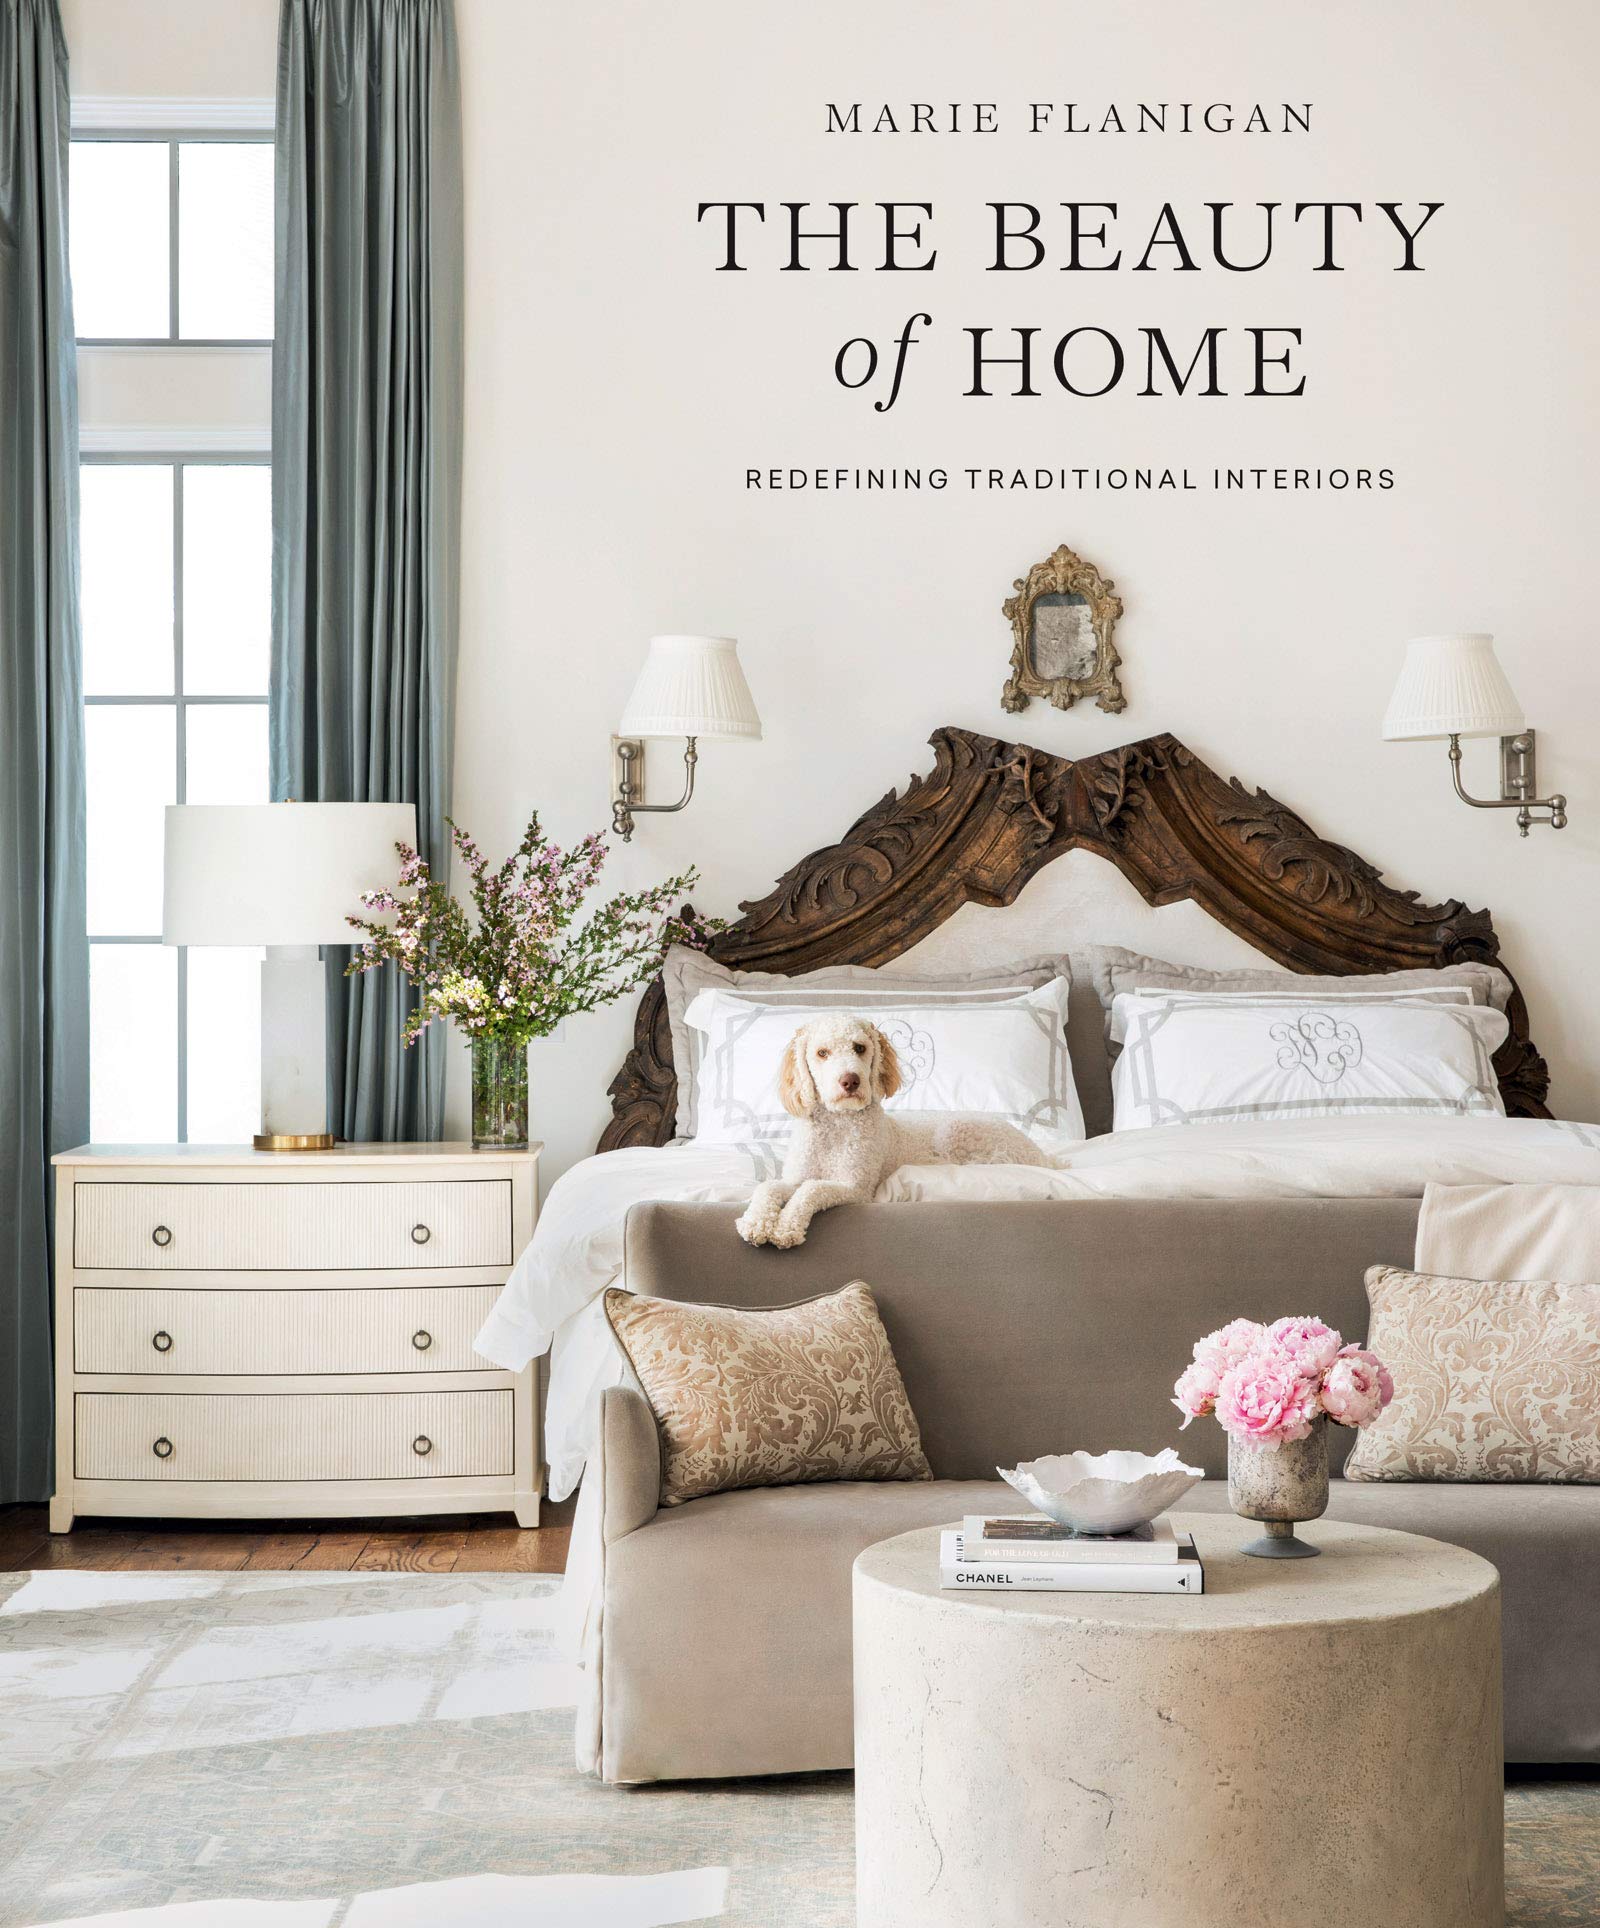 my favorite interior design books - the beauty of home